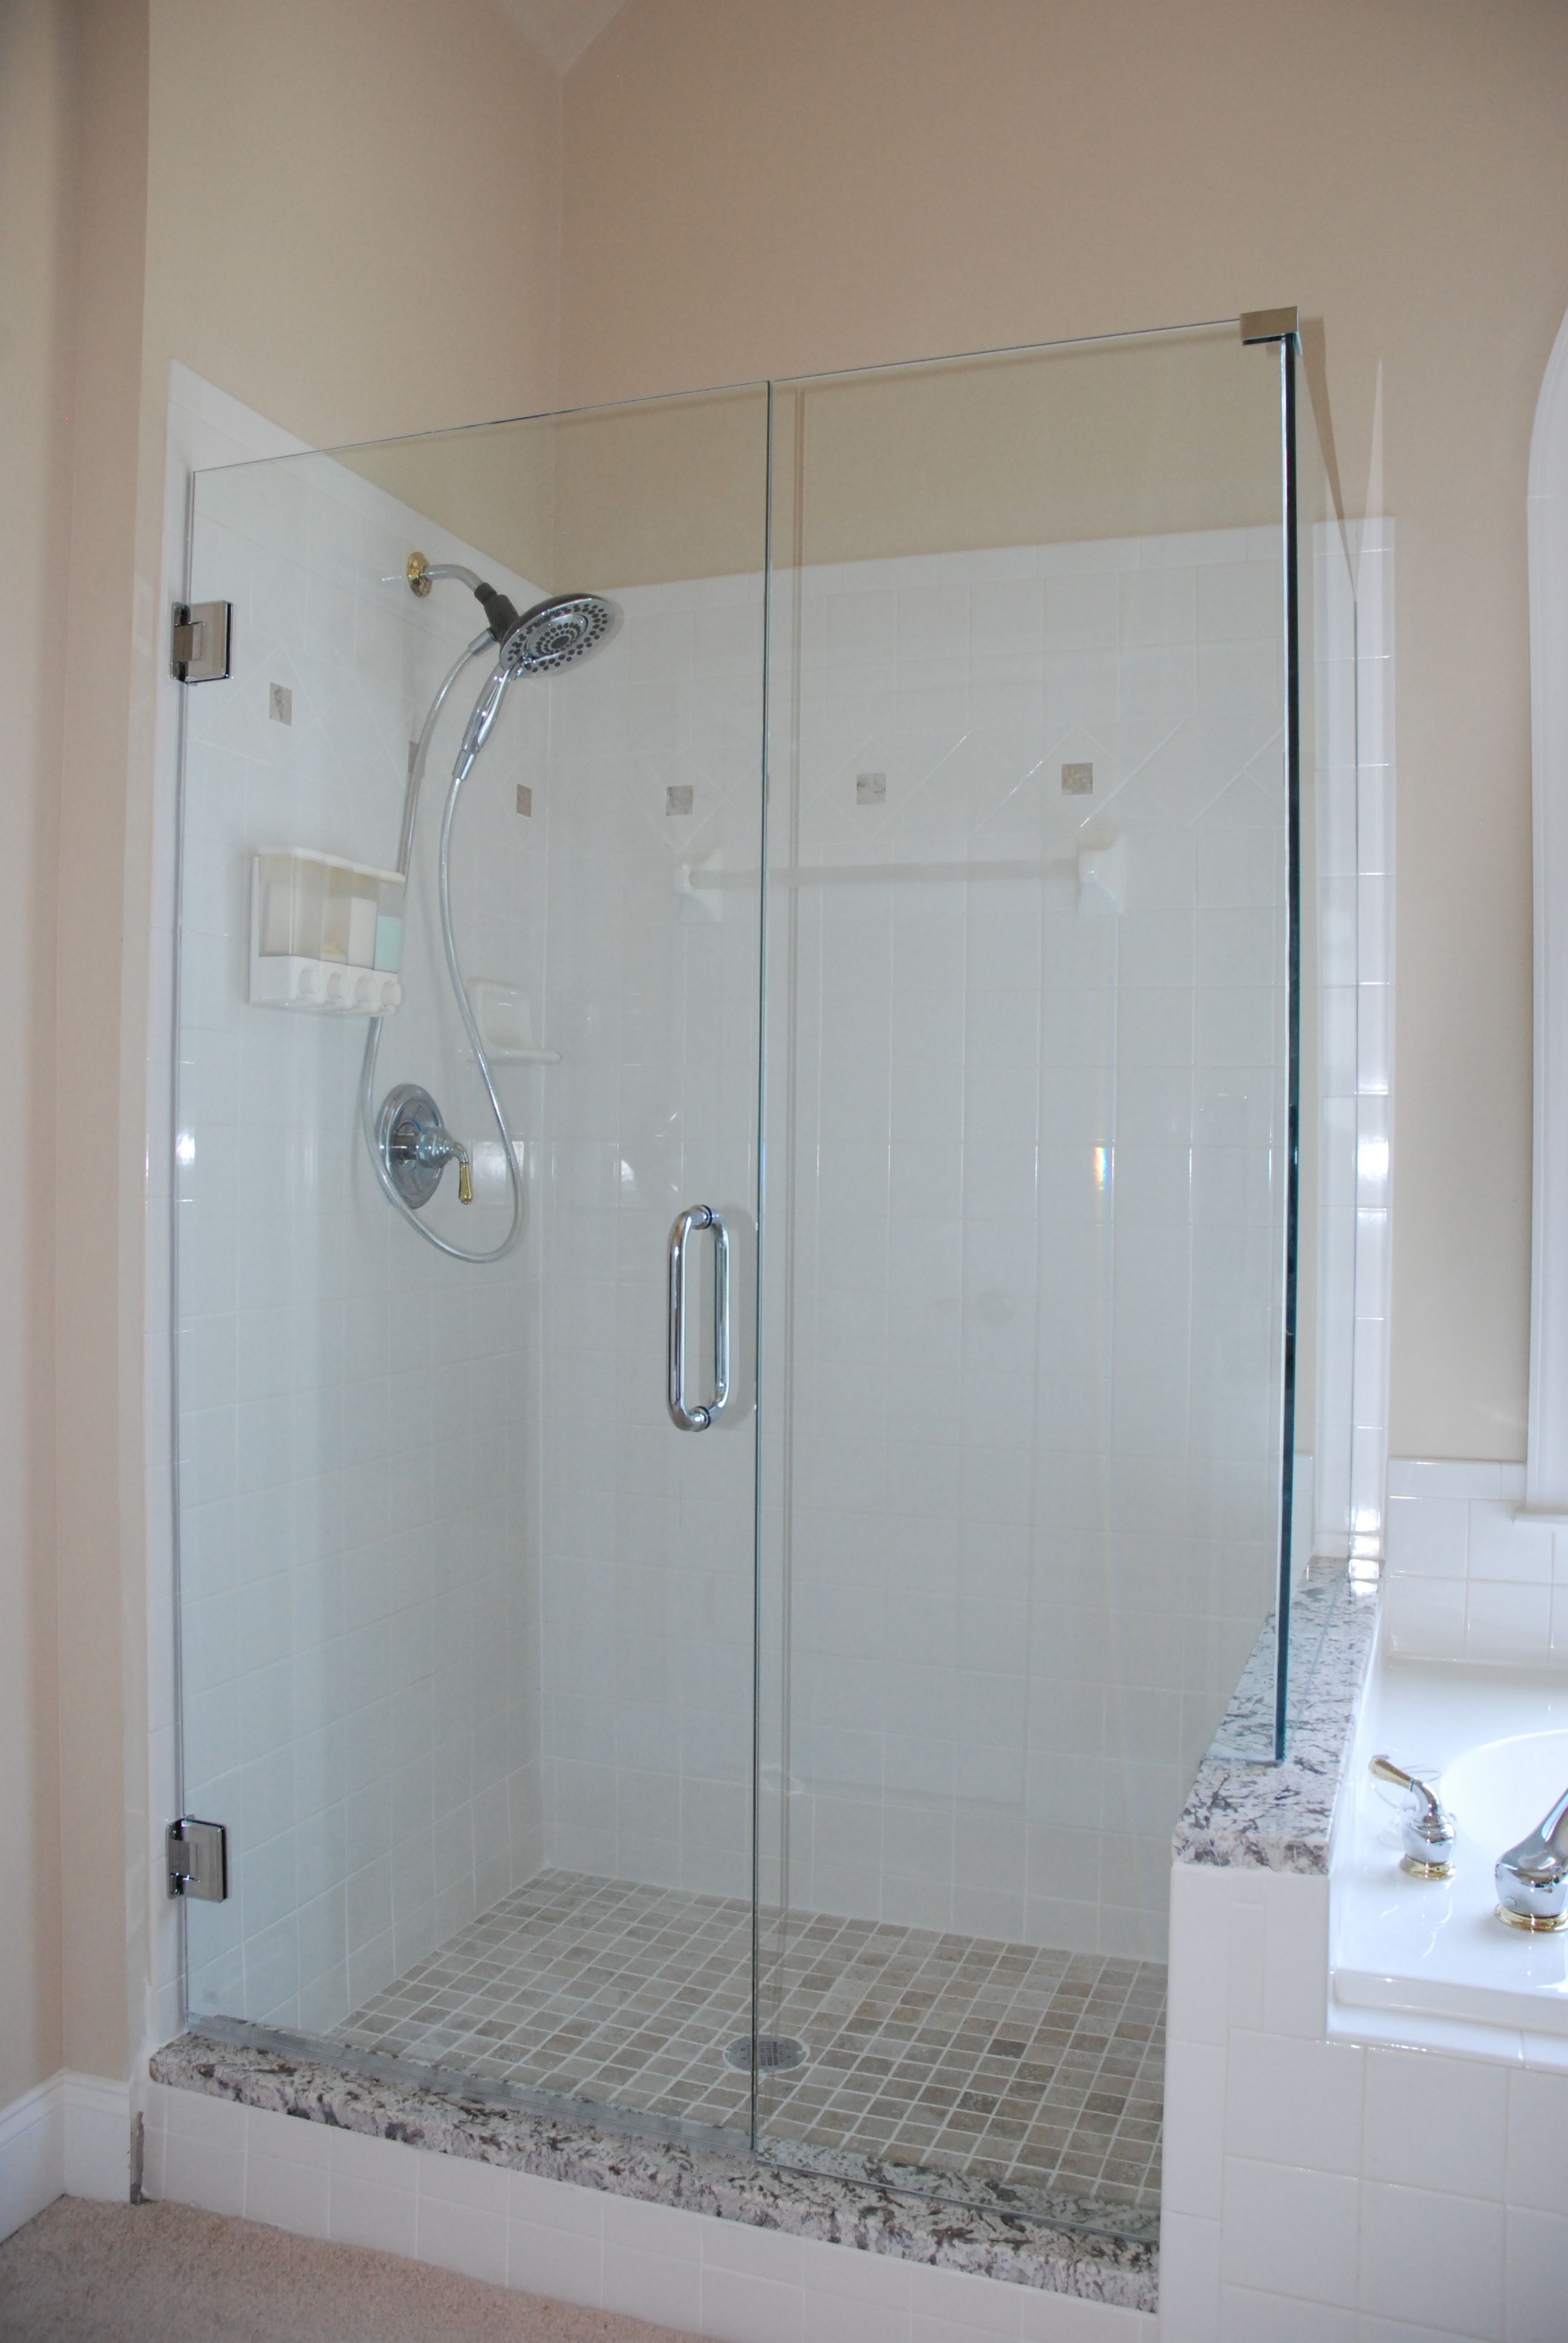 Shower Glass Shower Shiny Shower Glass Panel Covering Shower Bath At Small Bathroom With Ceramics Backsplash Bathroom Shower Glass Panel For Contemporary Bathroom Styles